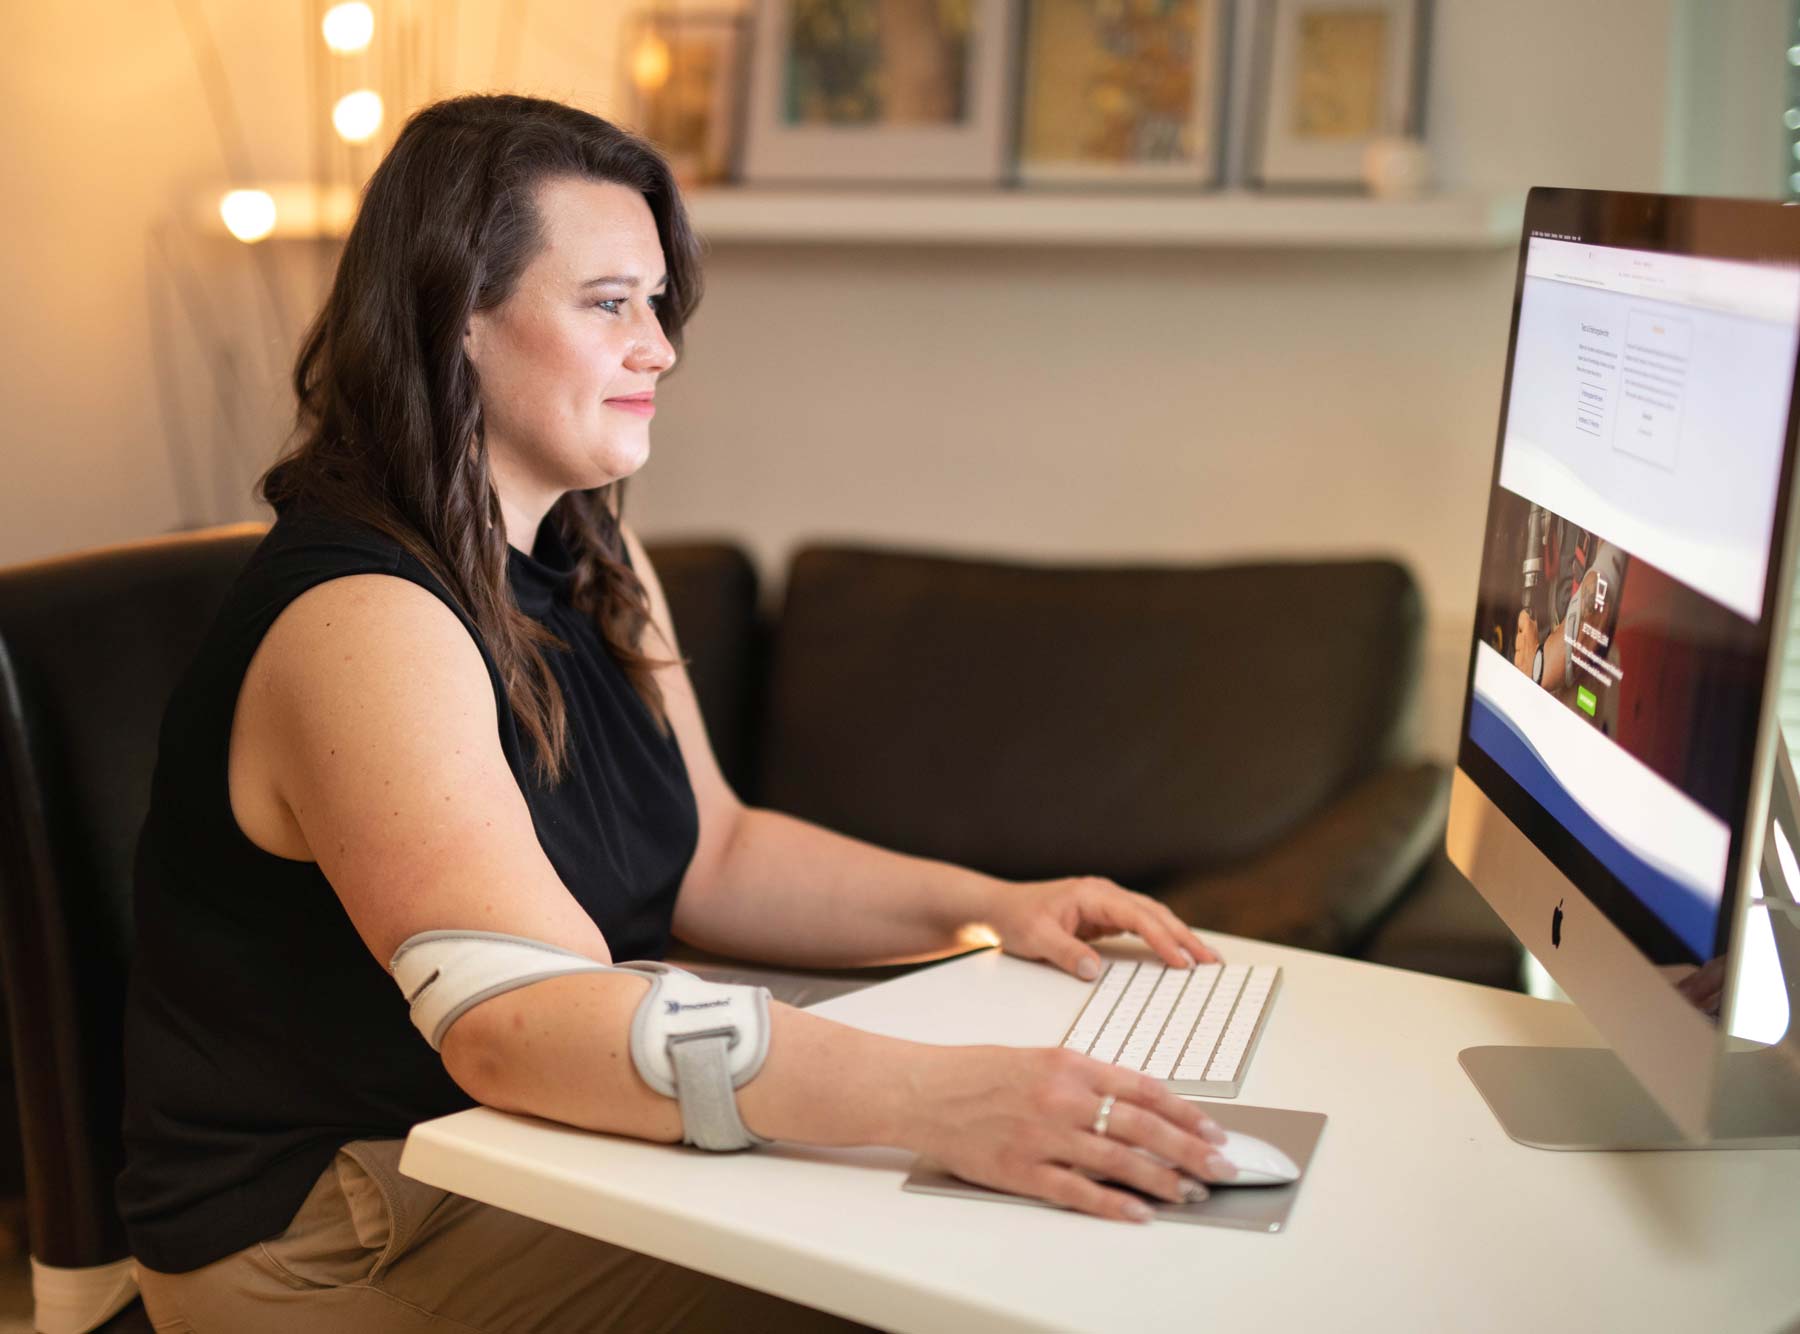 Woman working at PC and computer wearing Masalo cuff against mouse arm and tennis elbow